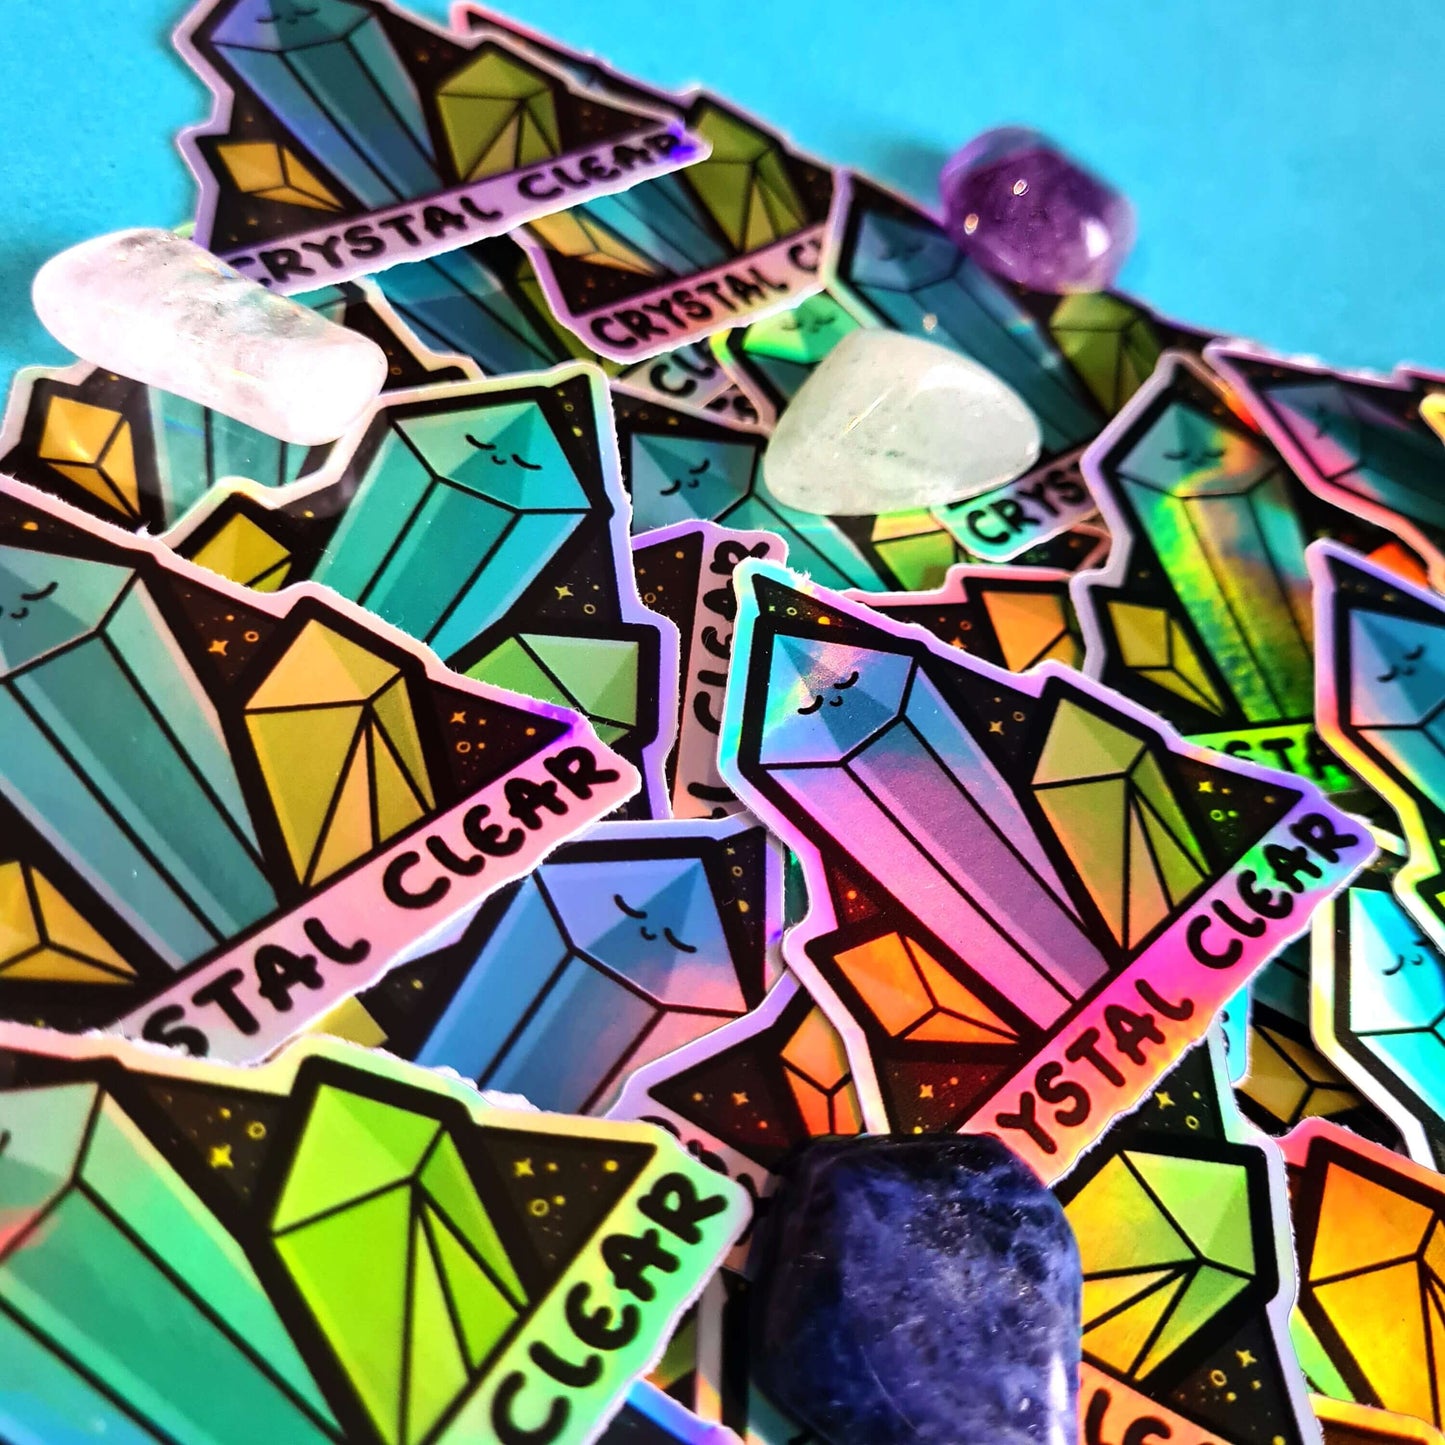 Crystal Clear Holographic Stickers pushed into a triangle shape with various crystals (amethyst, clear quartz, lapis lazuli, jasper) on a blue background. The triangle shaped sticker features three green crystal towers on a black sparkly background with bottom text reading crystal clear, the centre crystal is smiling. Inspired by witchy spiritual healing with crystals.